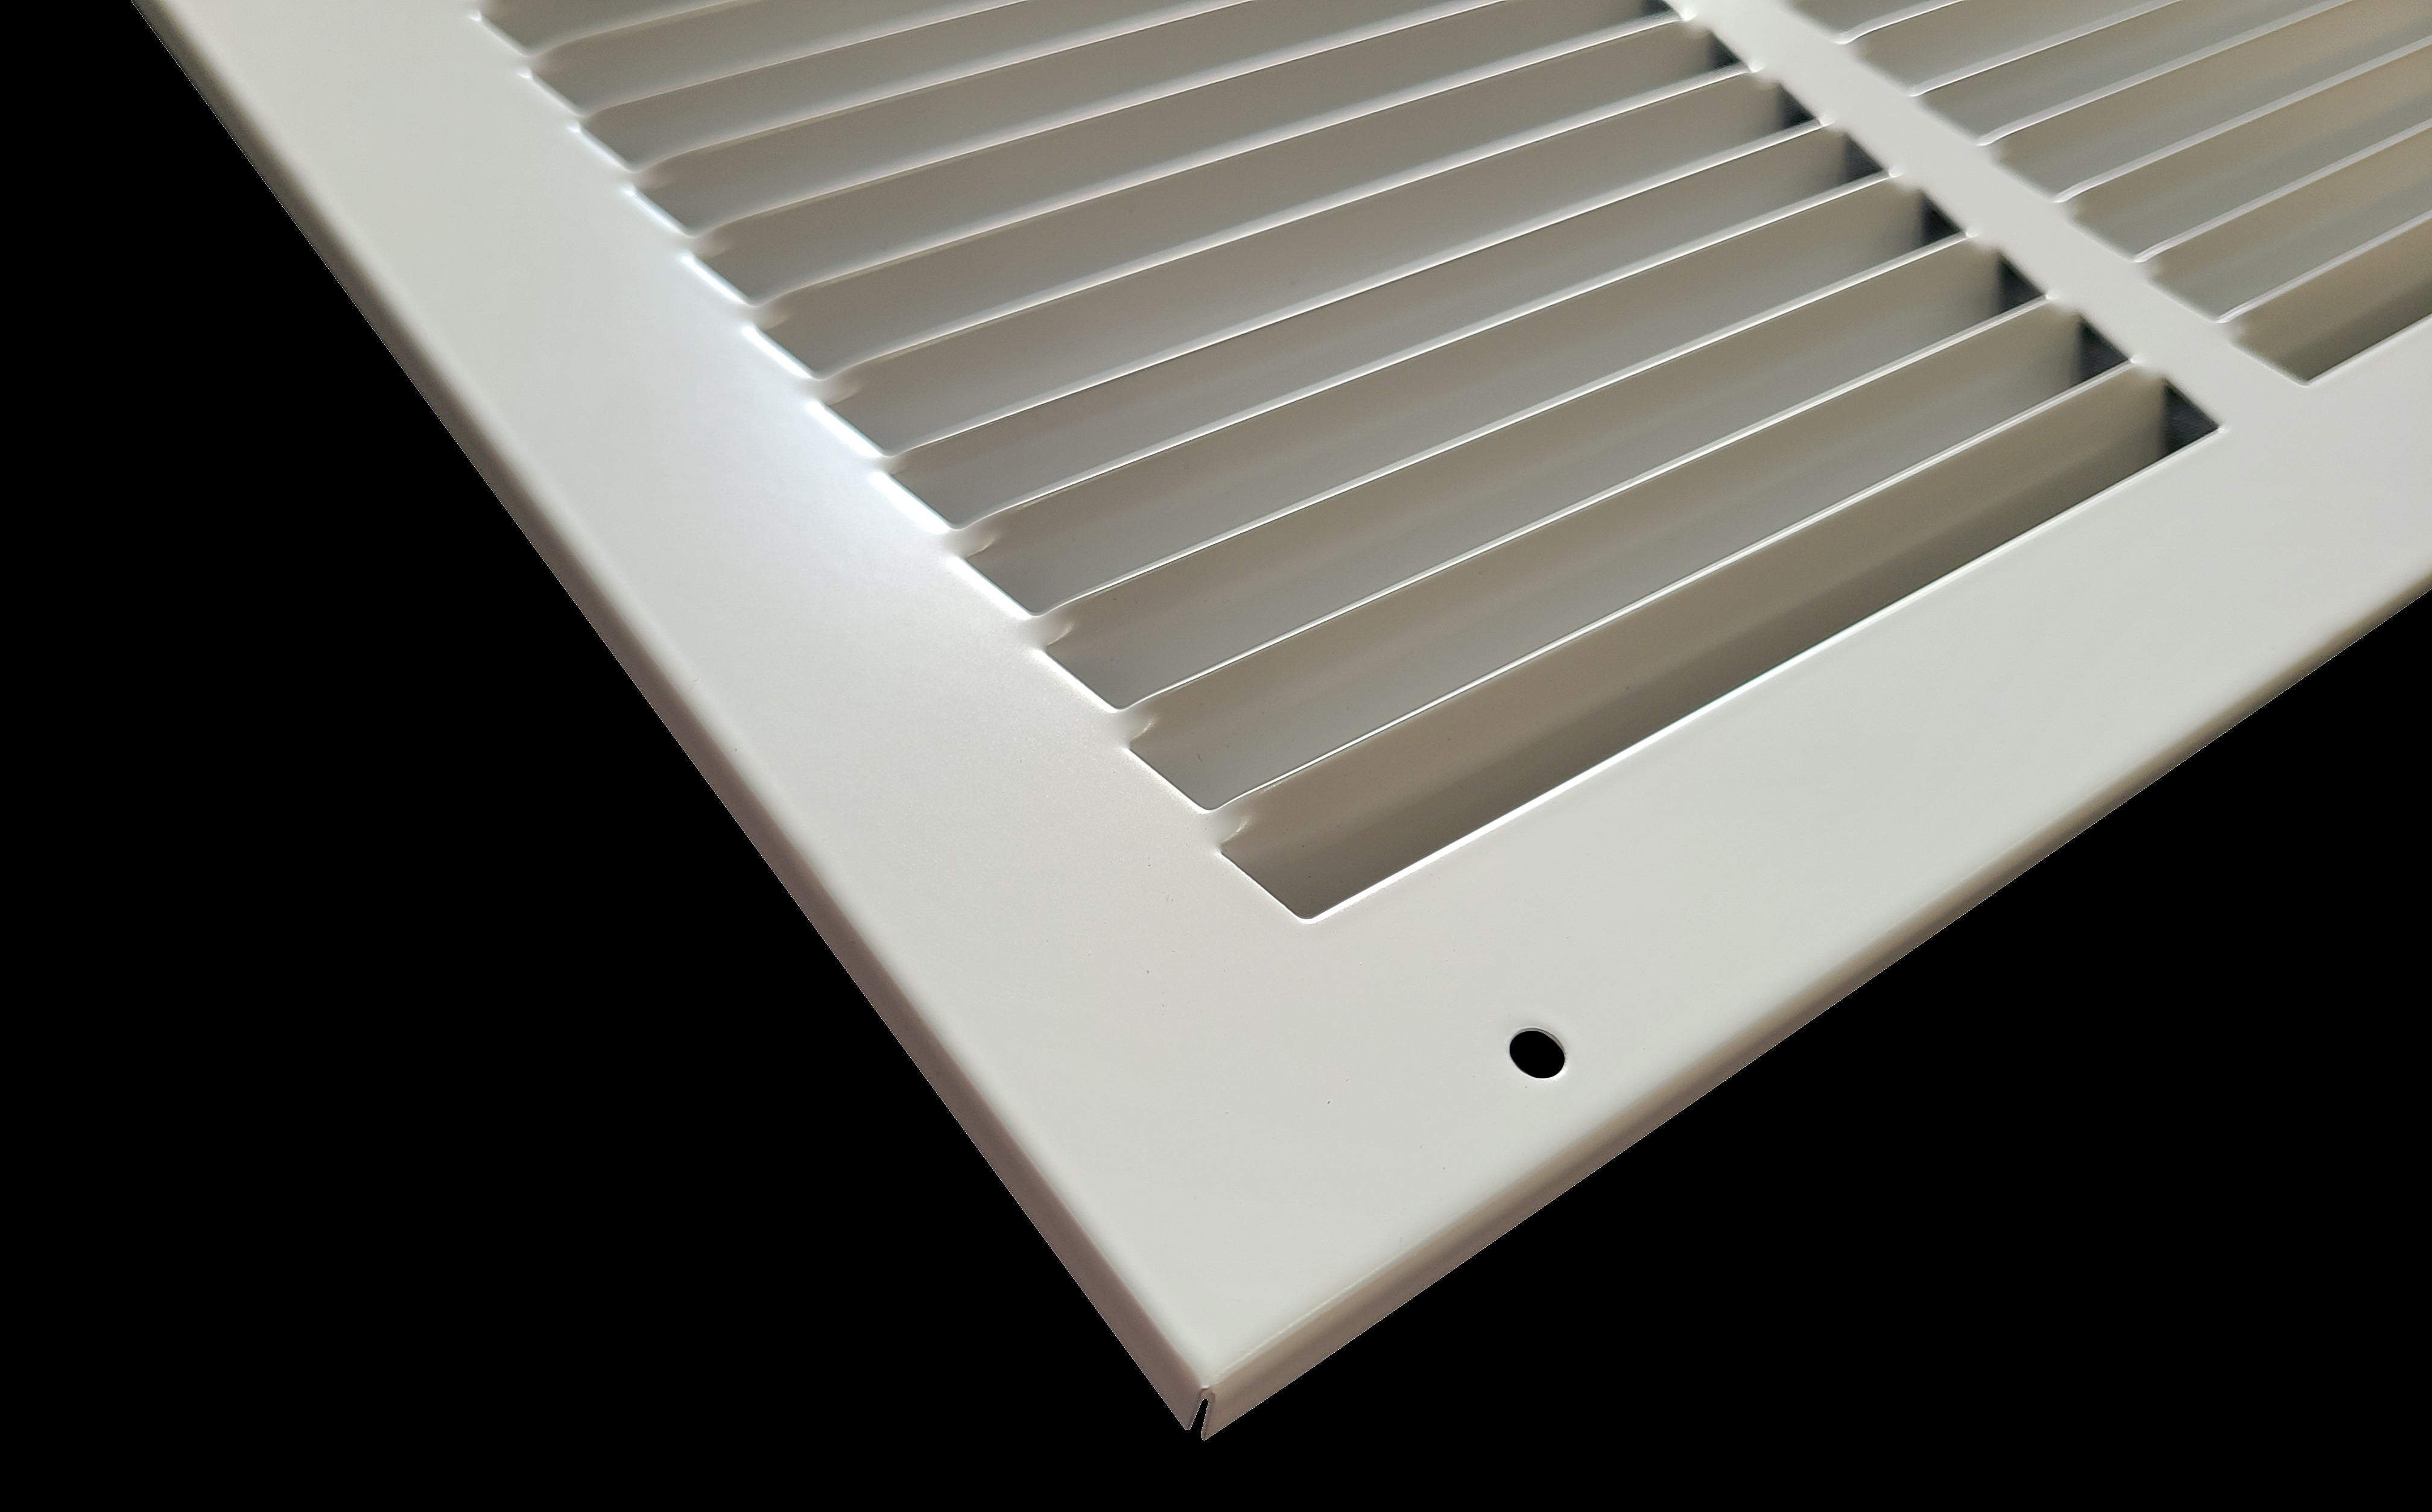 14" X 24" Duct Opening | Steel Return Air Grille for Sidewall and Ceiling | Outer Dimensions: 15.75"W X 25.75"H